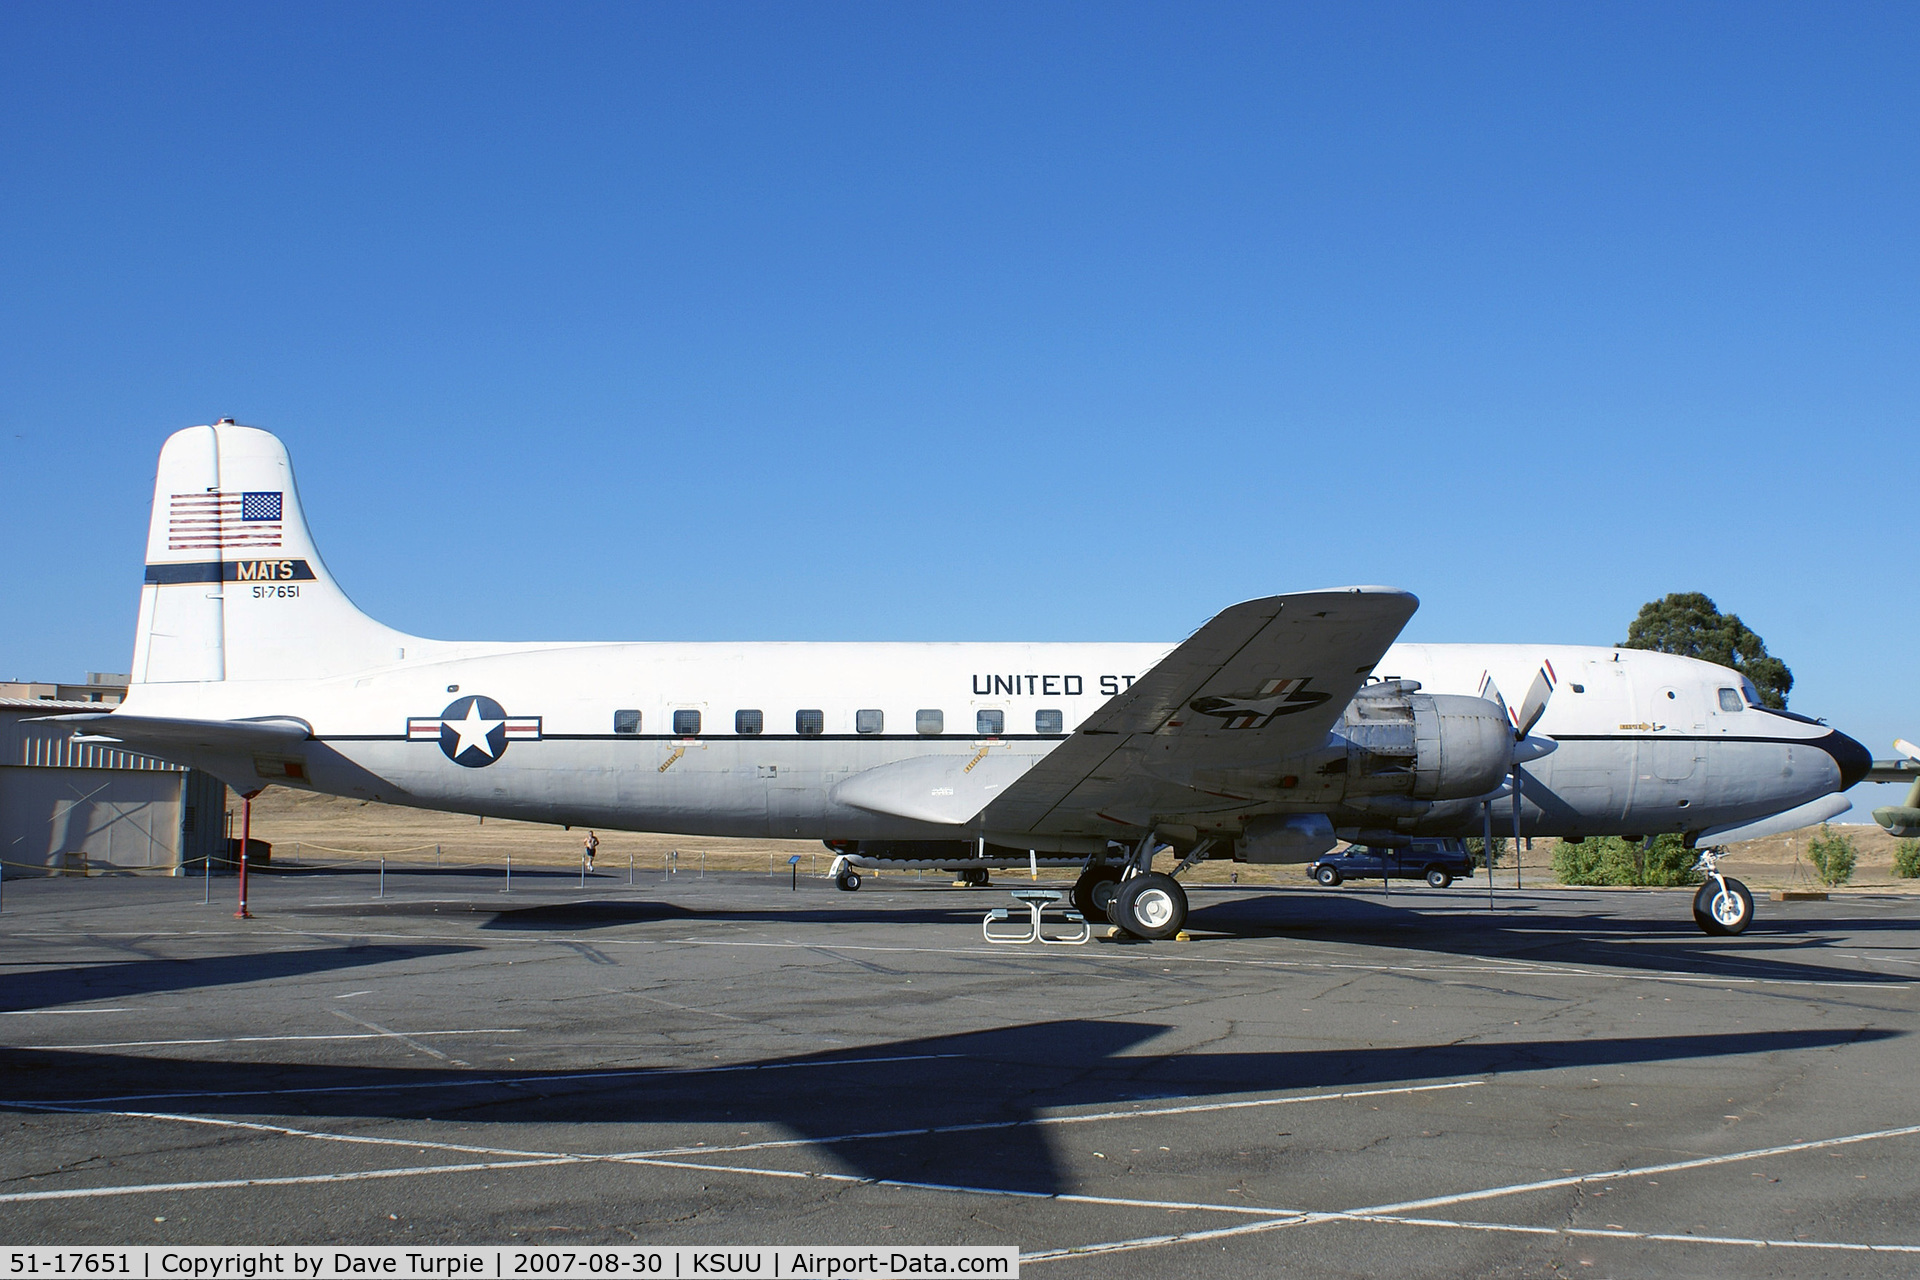 51-17651, 1951 Douglas VC-118B Liftmaster (R6D-1) C/N 43705, Also flew with the US Navy, registered as 131602.